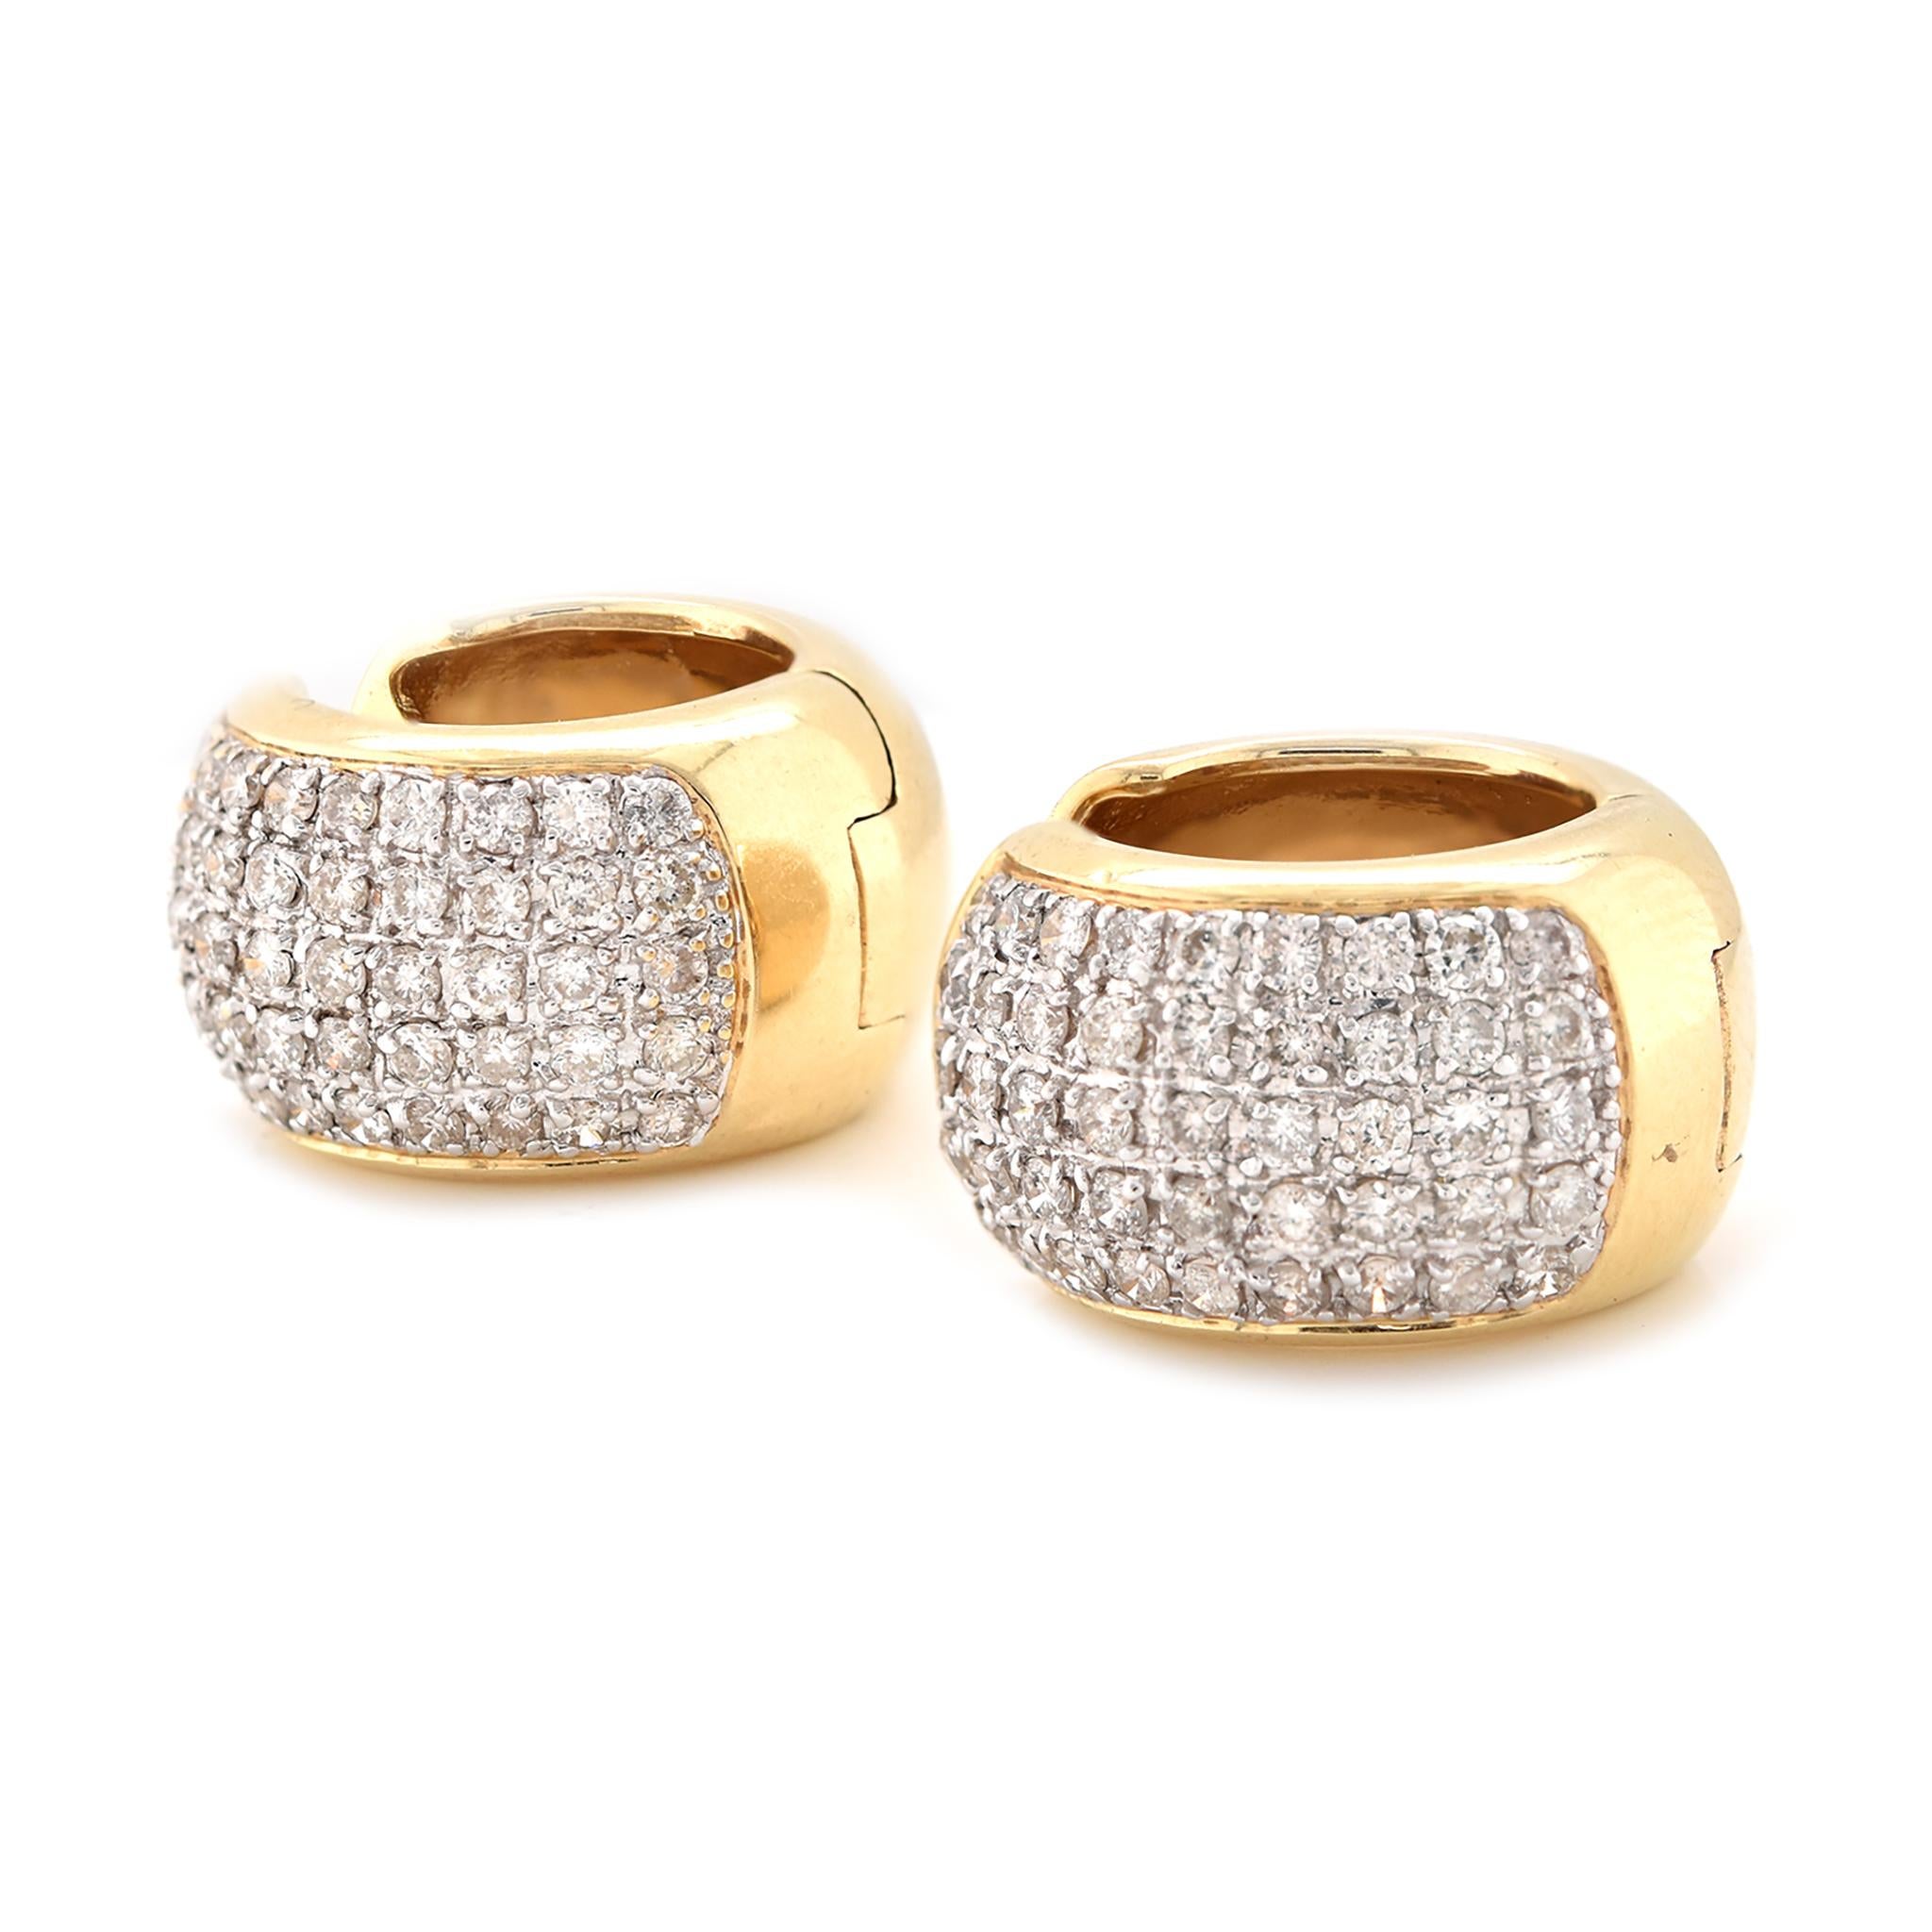 Diamond Huggie Earrings Sterling Silver Wide Huggies Round Four Row Pave Set Fancy Yellow Tone 1/4 Cttw